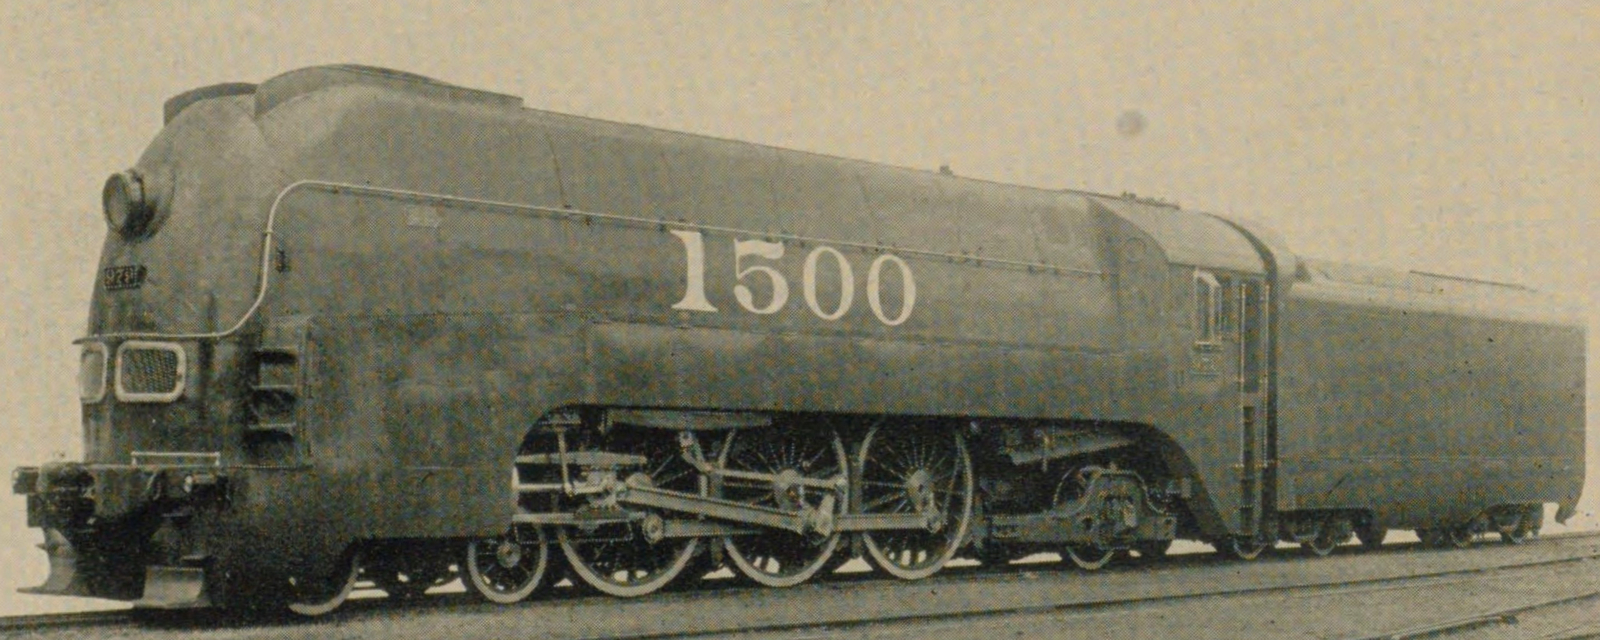 No. 797 was the 1,500<sup>th</sup> Locomotive from Kawasaki and bears the appropriate inscription here